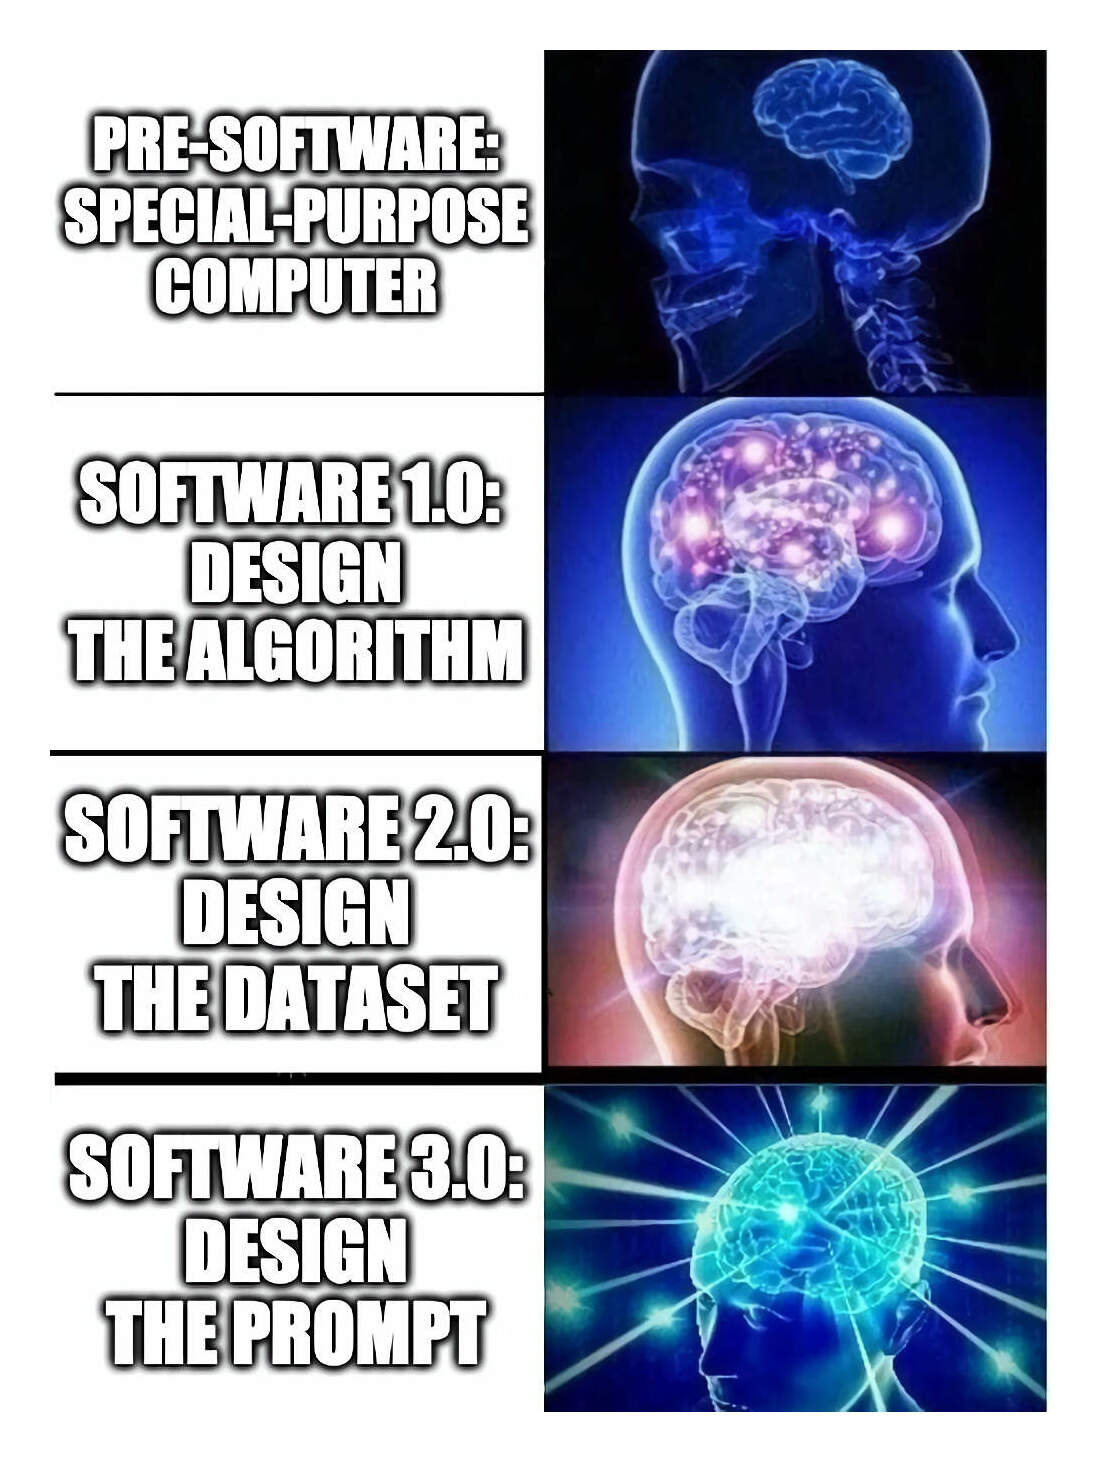 Few-shot learning/writing prompts: “Software 3.0”? (Andrej Karpathy, 2020-06-18)